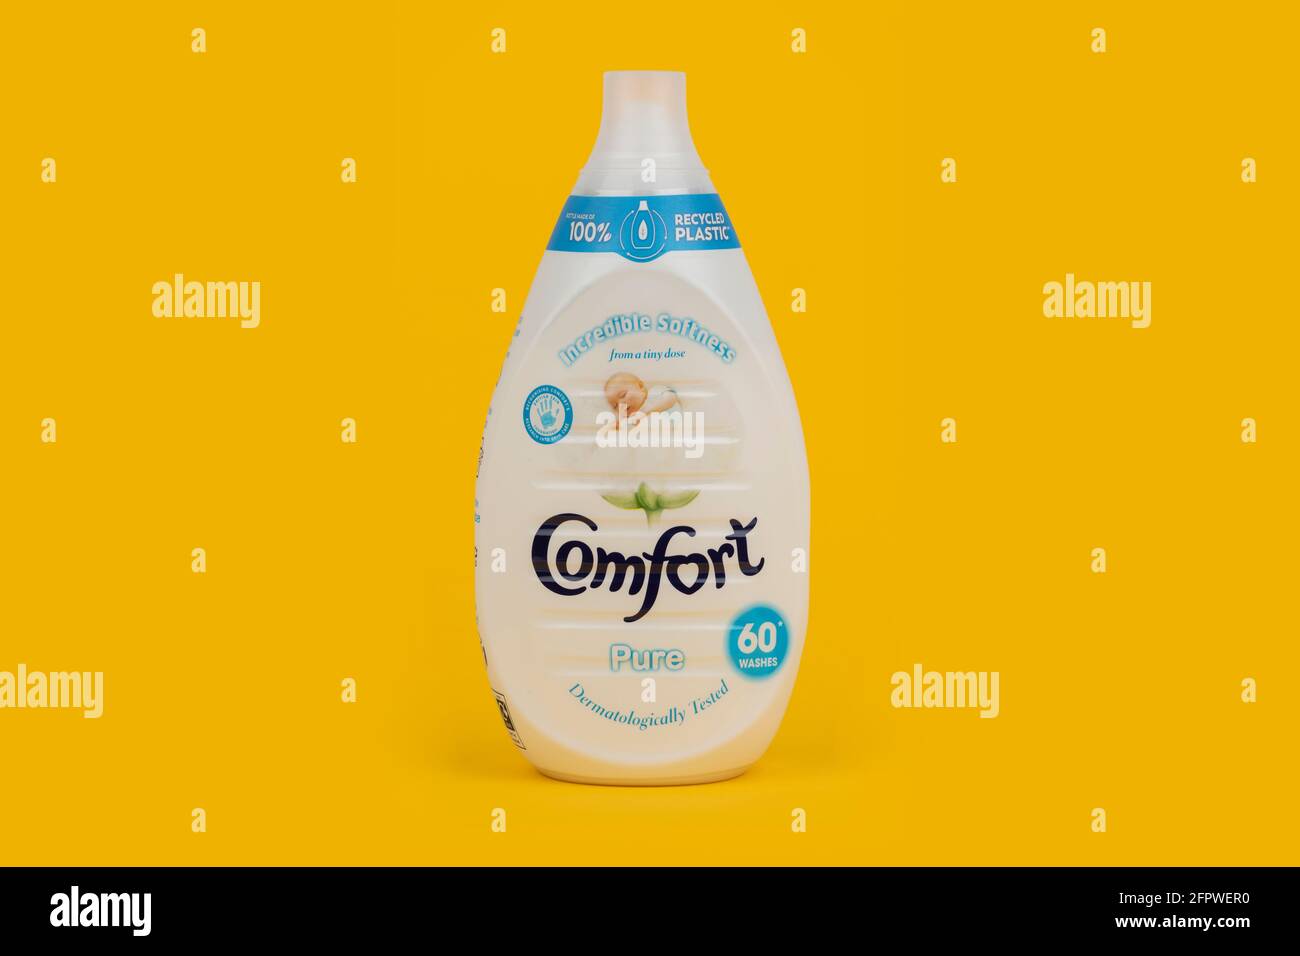 A bottle of Comfort Pure fabric conditioner shot on a yellow background. Stock Photo